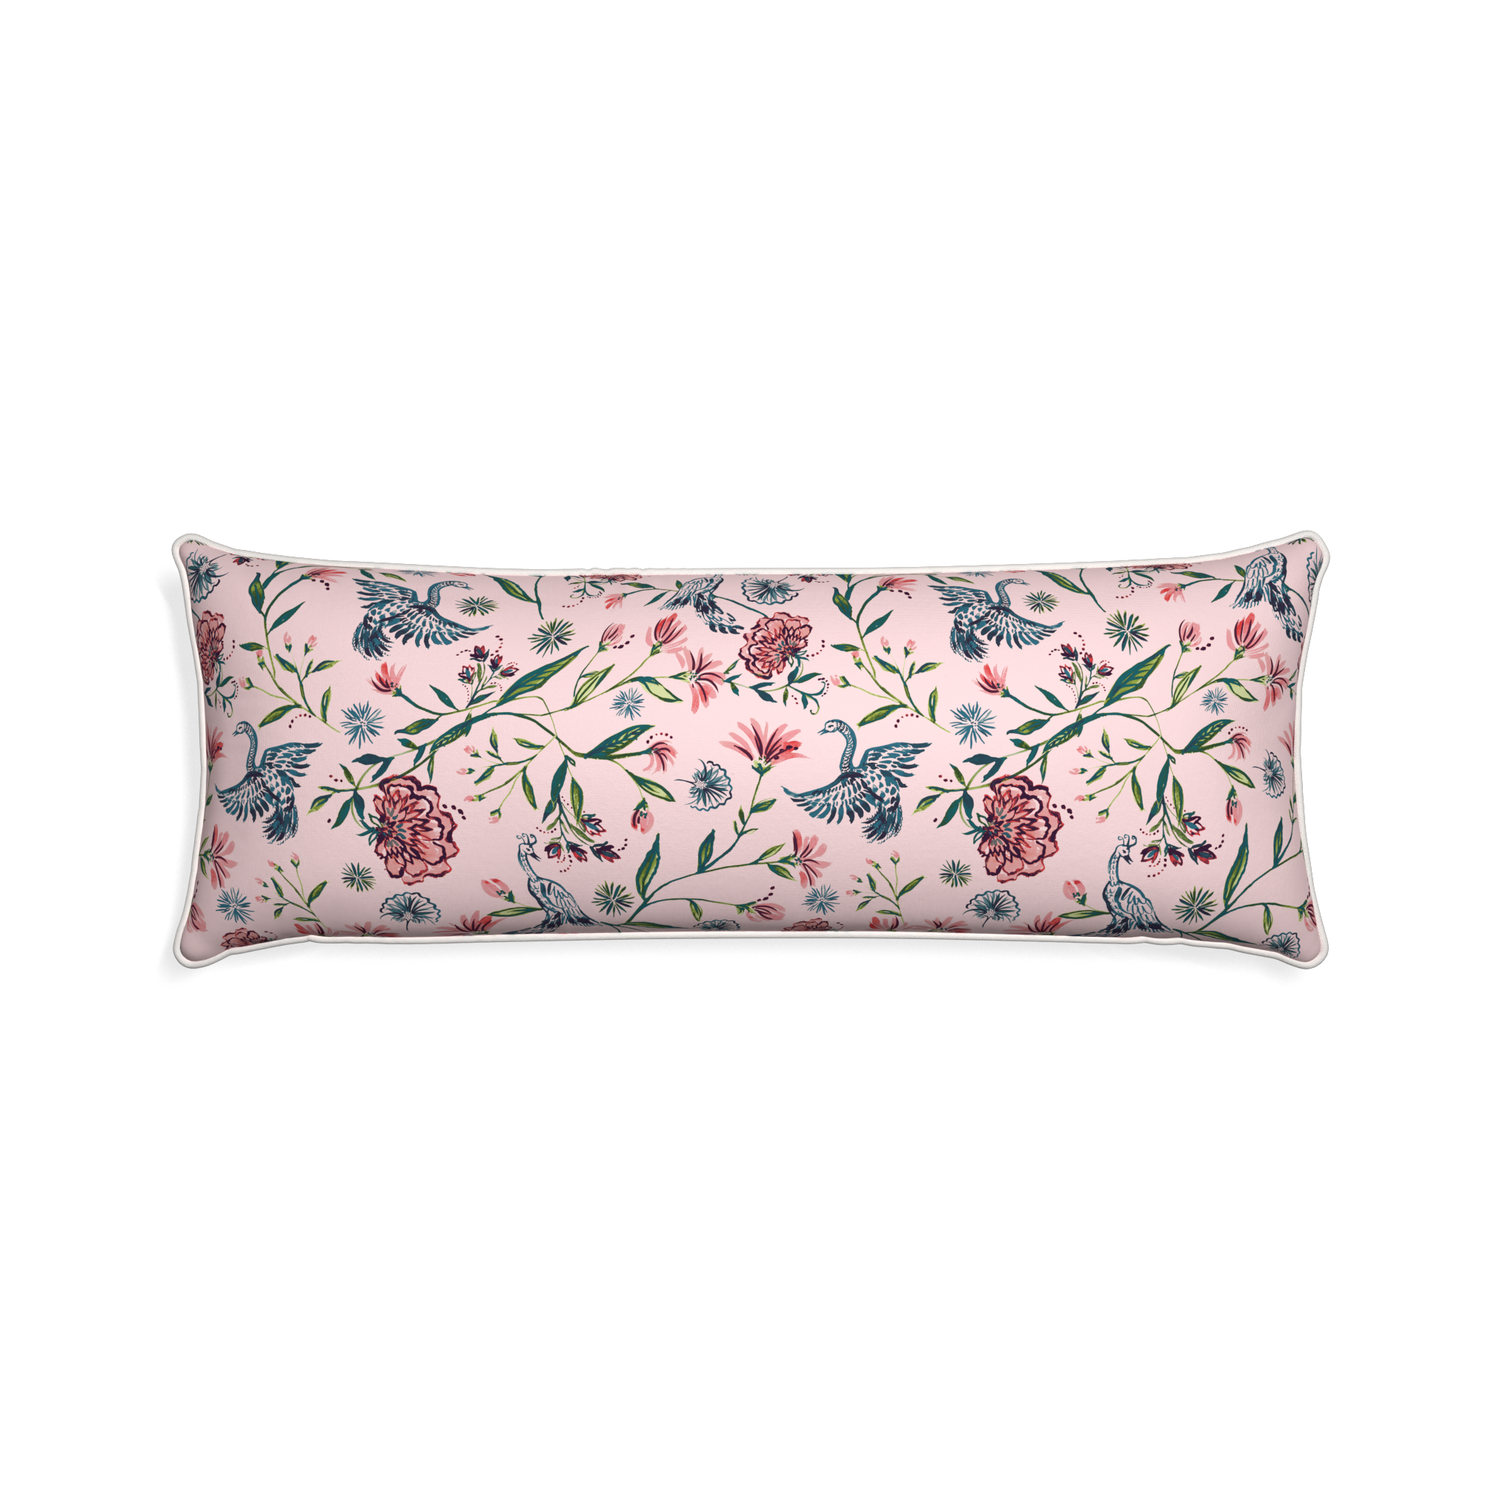 Xl-lumbar daphne rose custom pillow with snow piping on white background